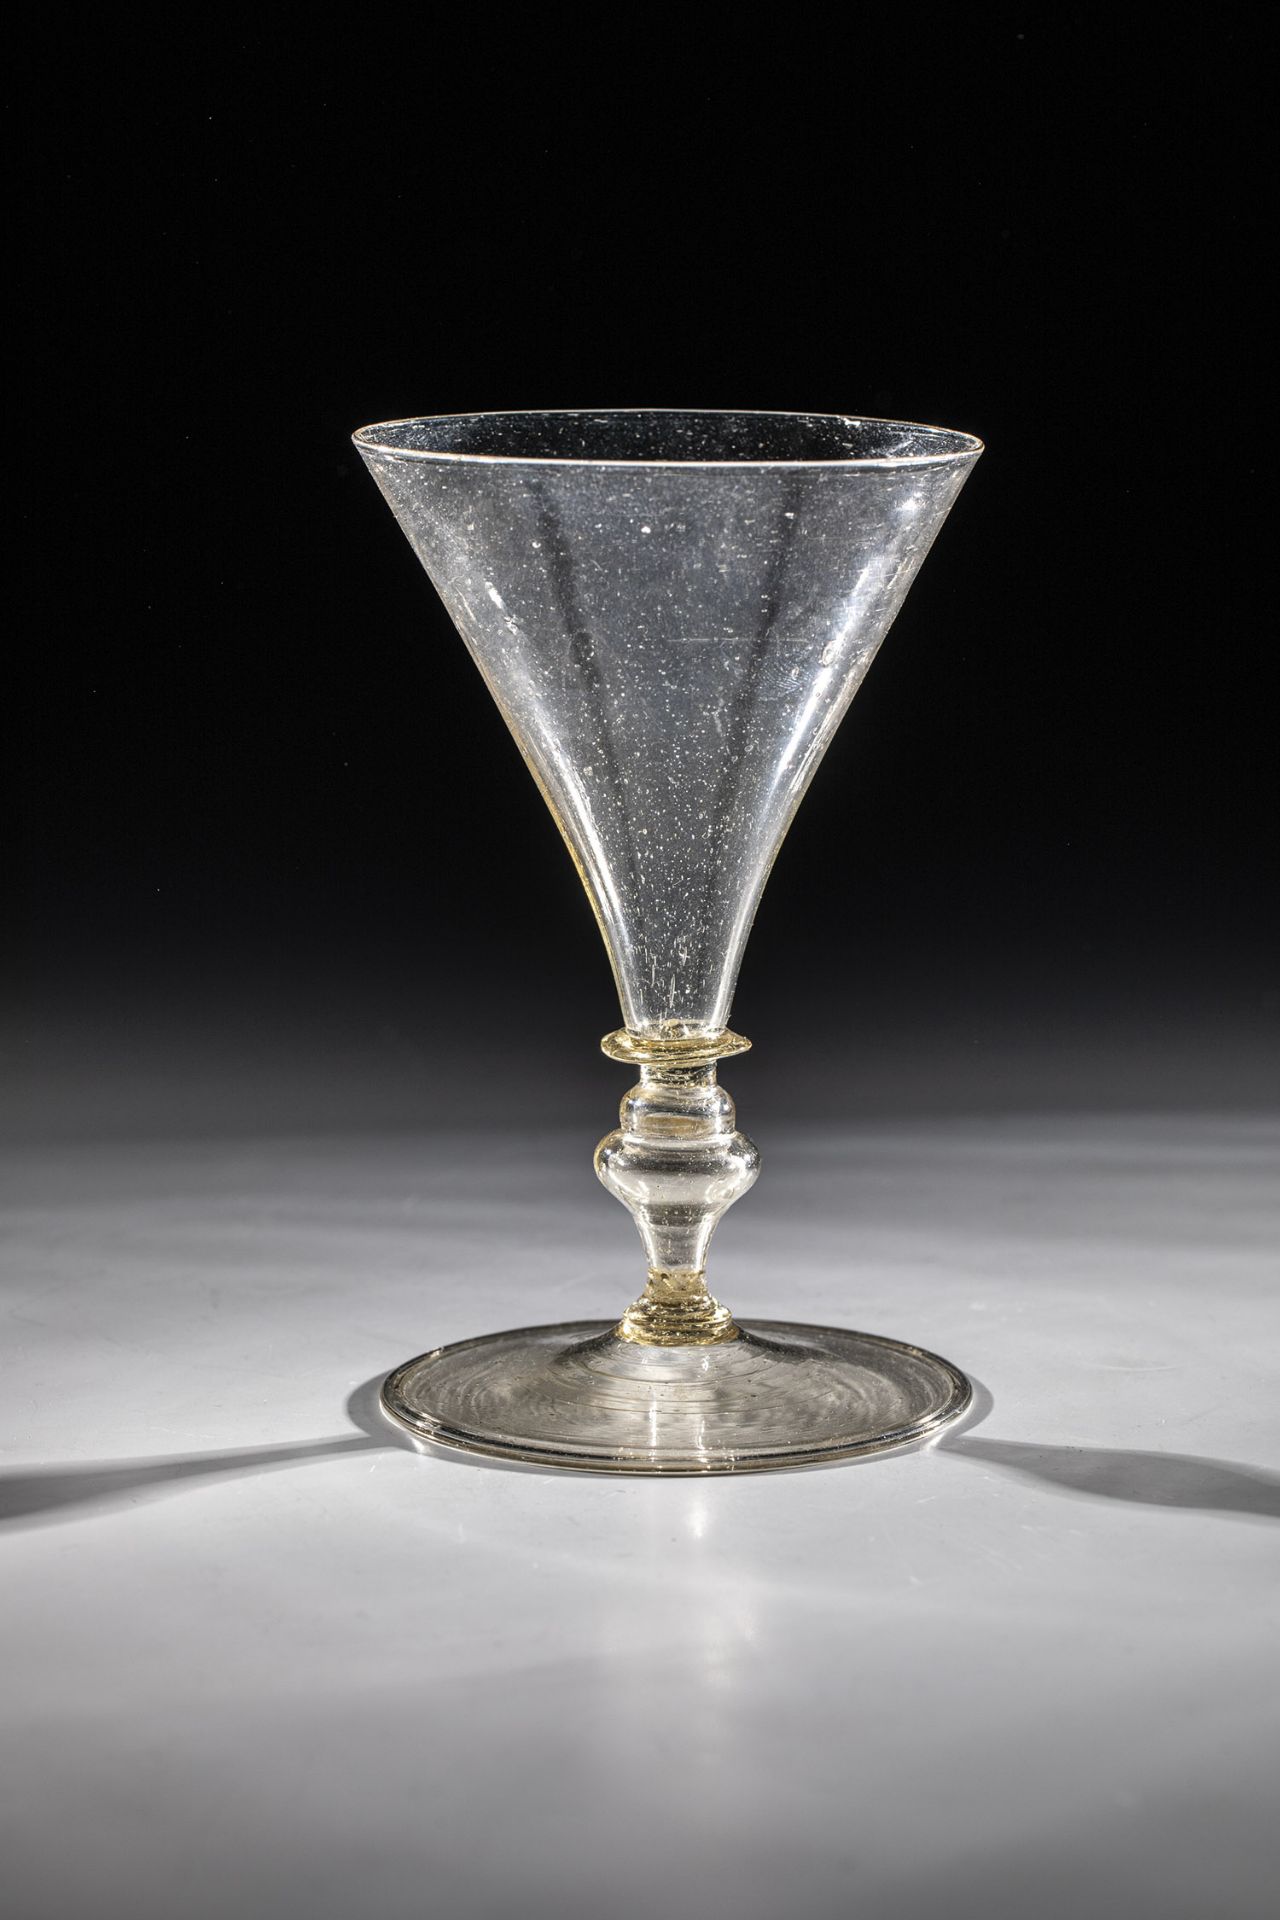 Rare goblet Venice or Facon de Venise, 17th century Lightly smoked, thin-walled glass. Disc base